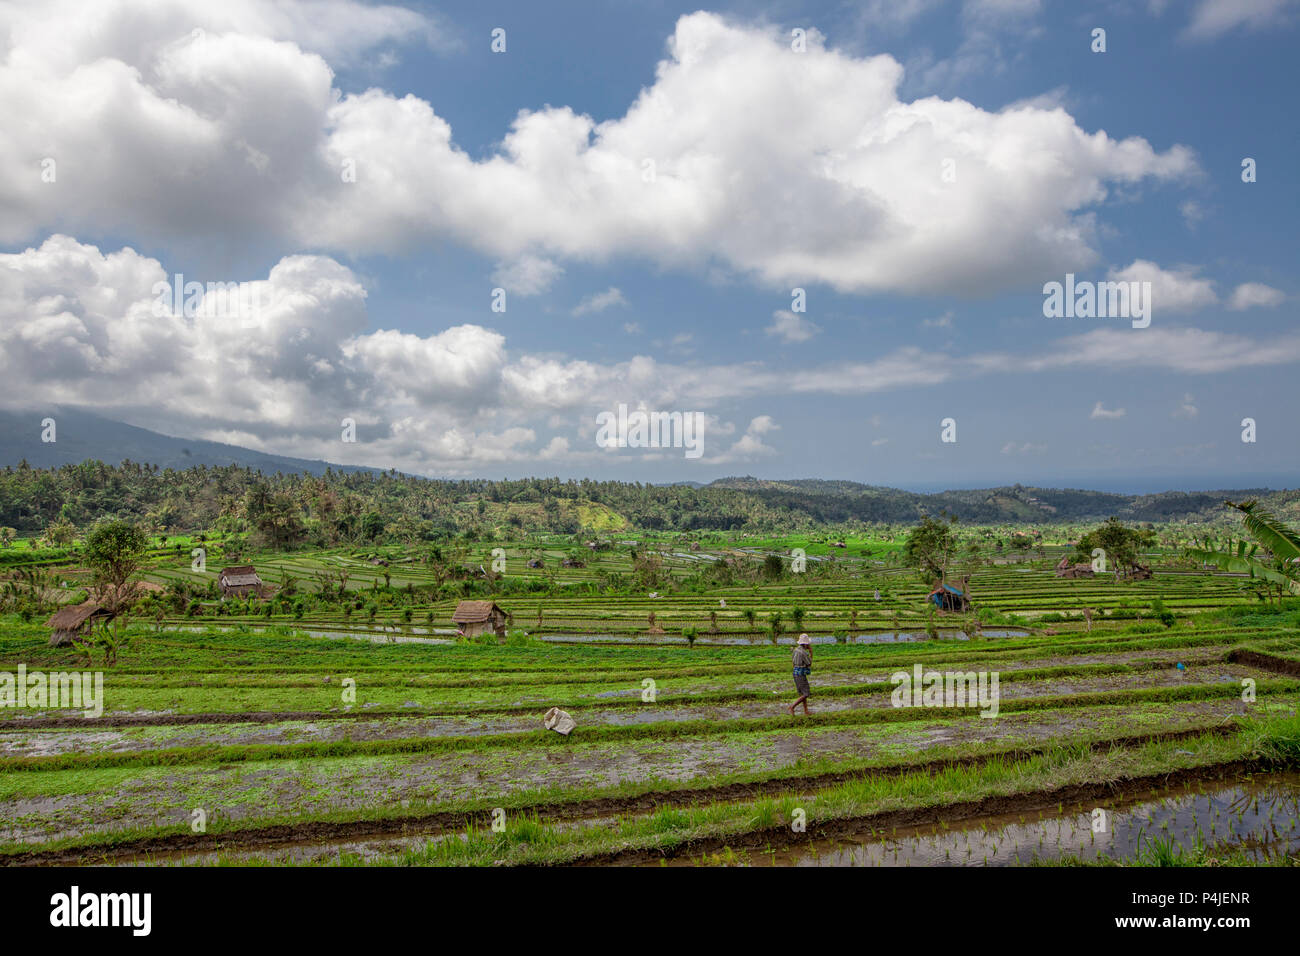 An unidentified farmer checks his growing paddy plants on the terraced rice fields in Bali, Indonesia Stock Photo